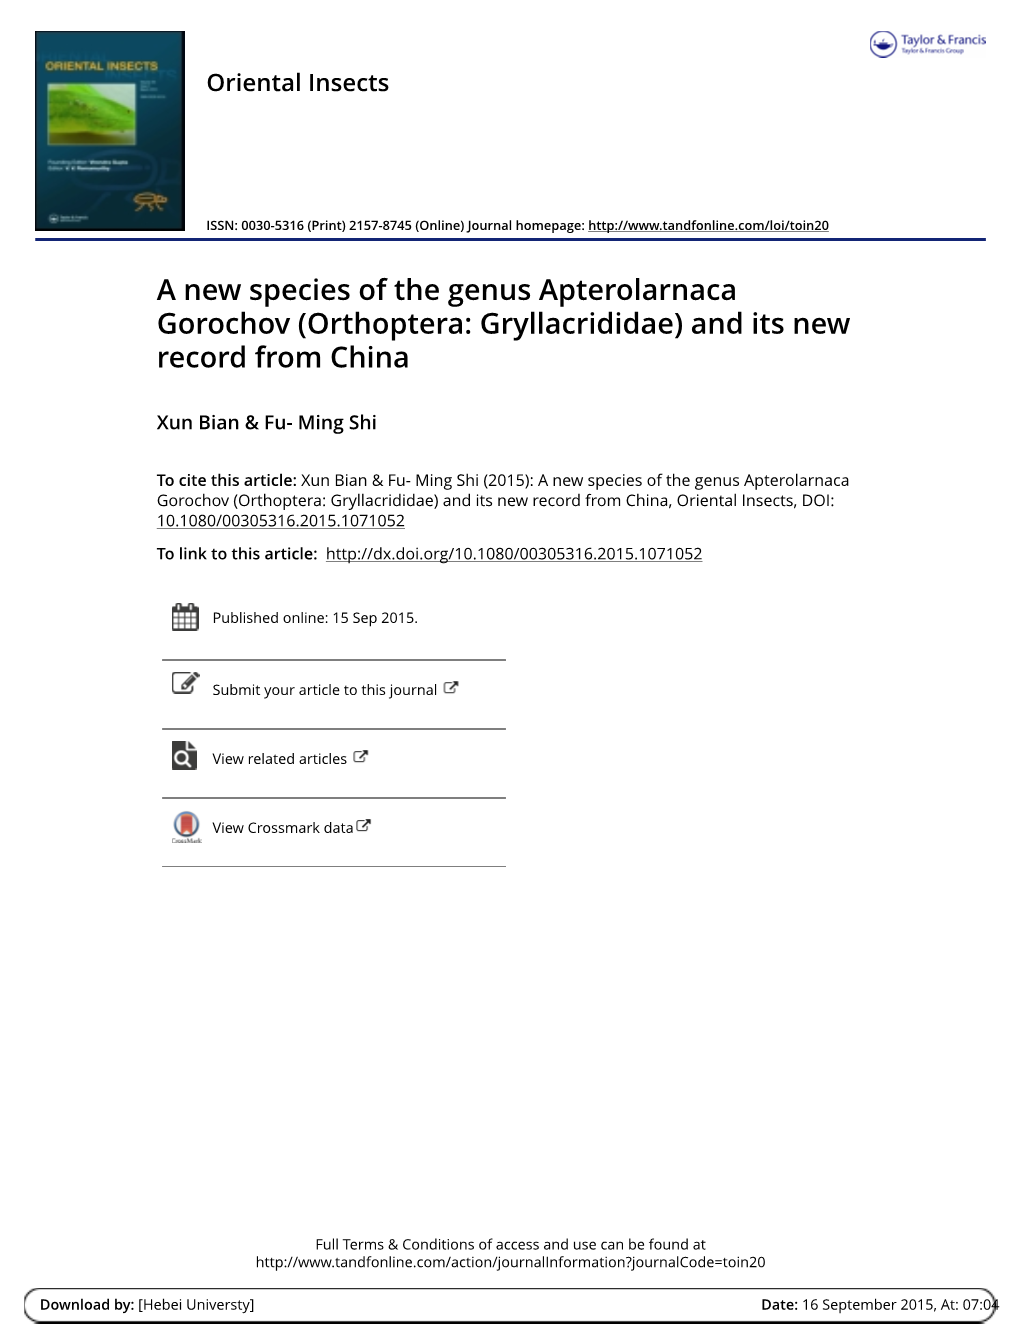 A New Species of the Genus Apterolarnaca Gorochov (Orthoptera: Gryllacrididae) and Its New Record from China